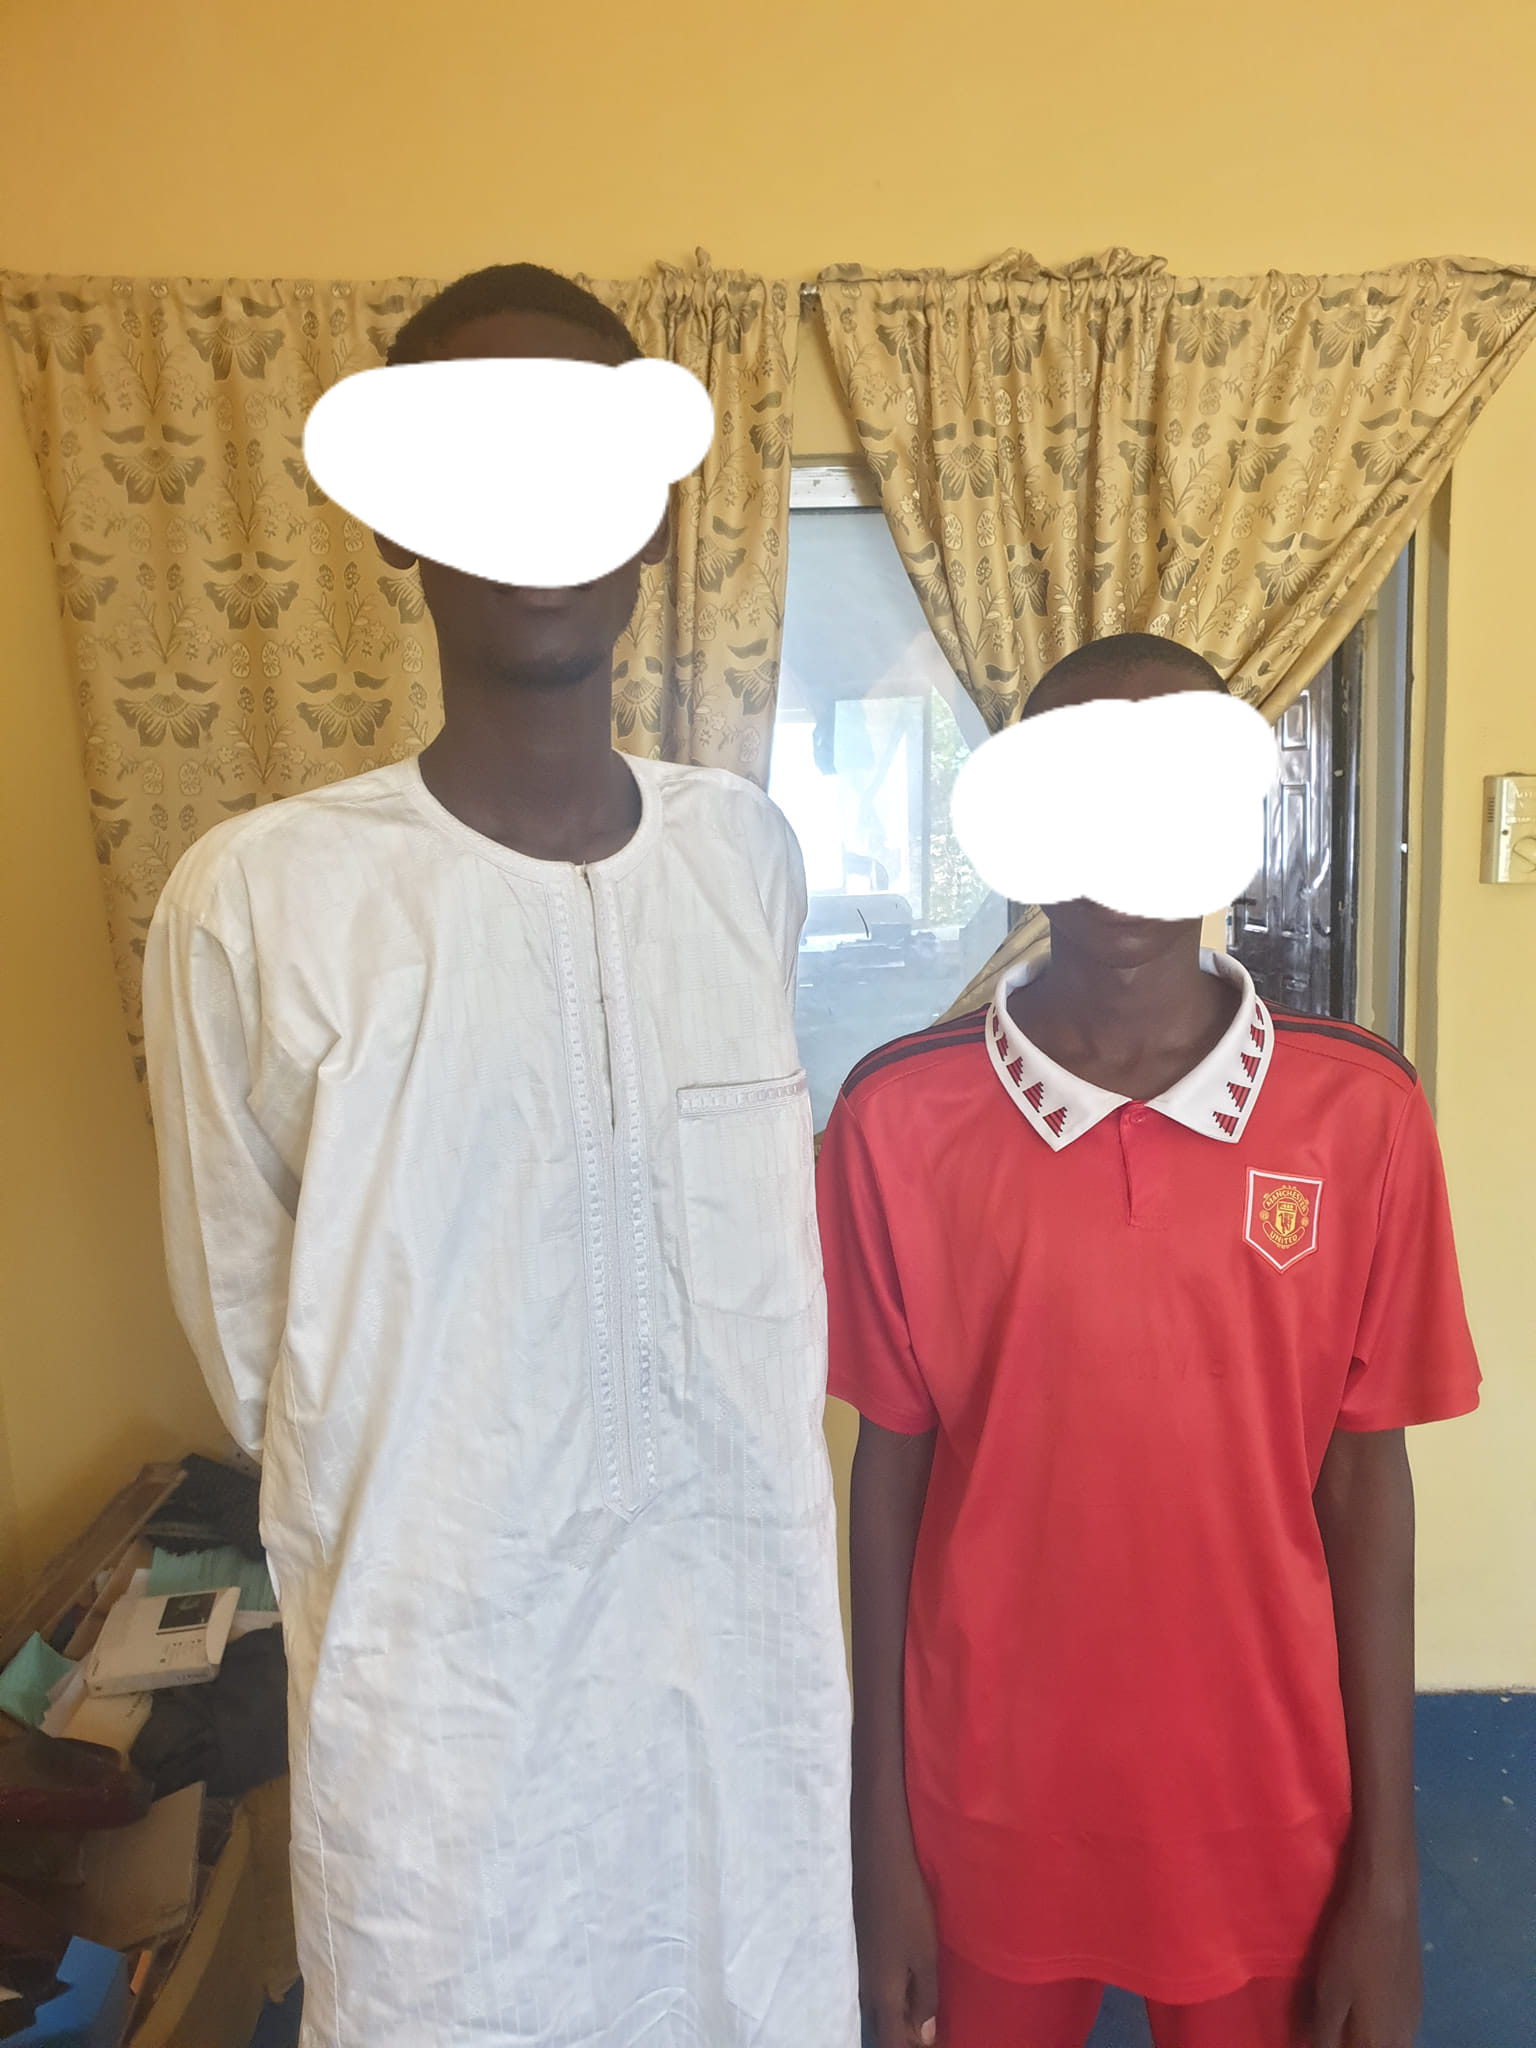 Jigawa Police arrest 18-year-old boy for faking own kidnap